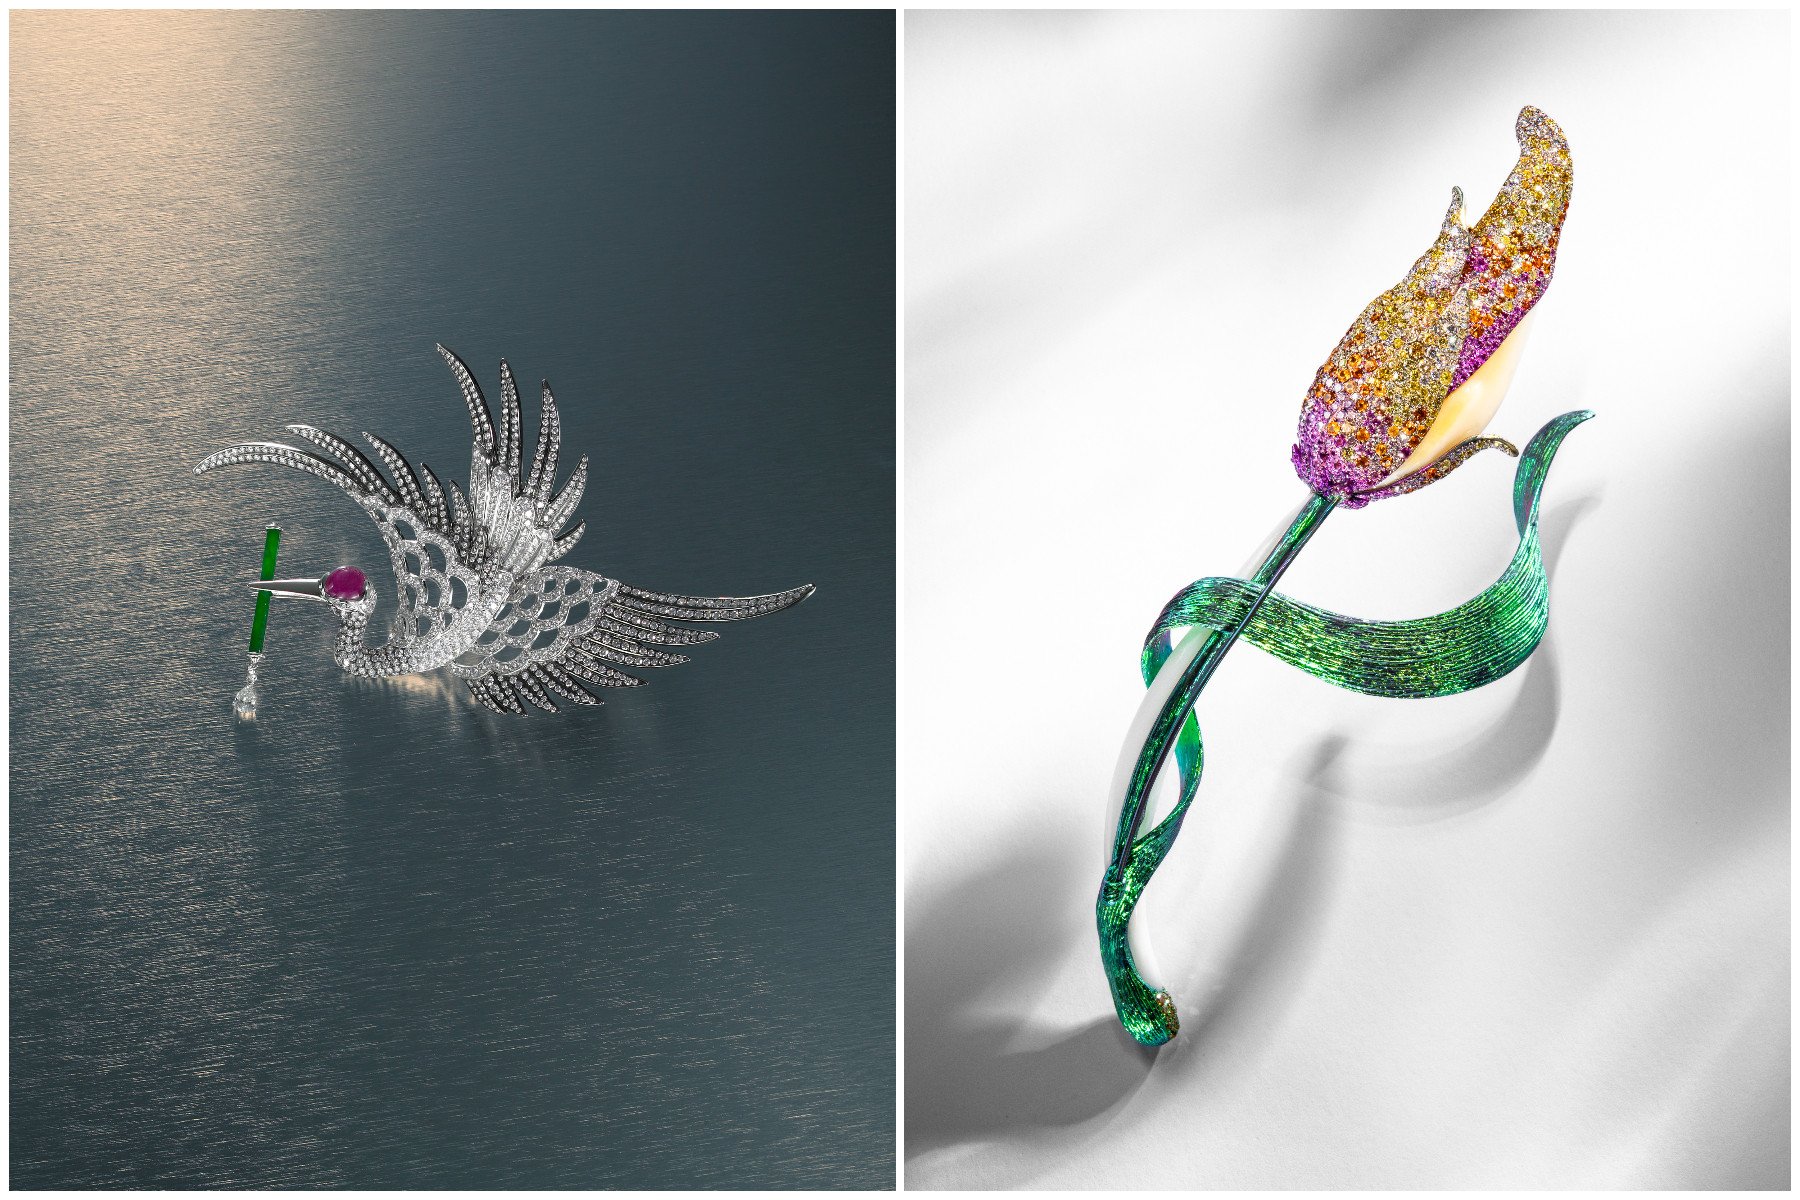 Anna Hu Haute Joaillerie’s fine jewellery pieces to be displayed at Tefaf in Maastricht, the Netherlands, March 9 to 14, include Gnossienne Brooch (left) and Dance of Dunhuang High Jewellery Brooch. Photos: Handouts